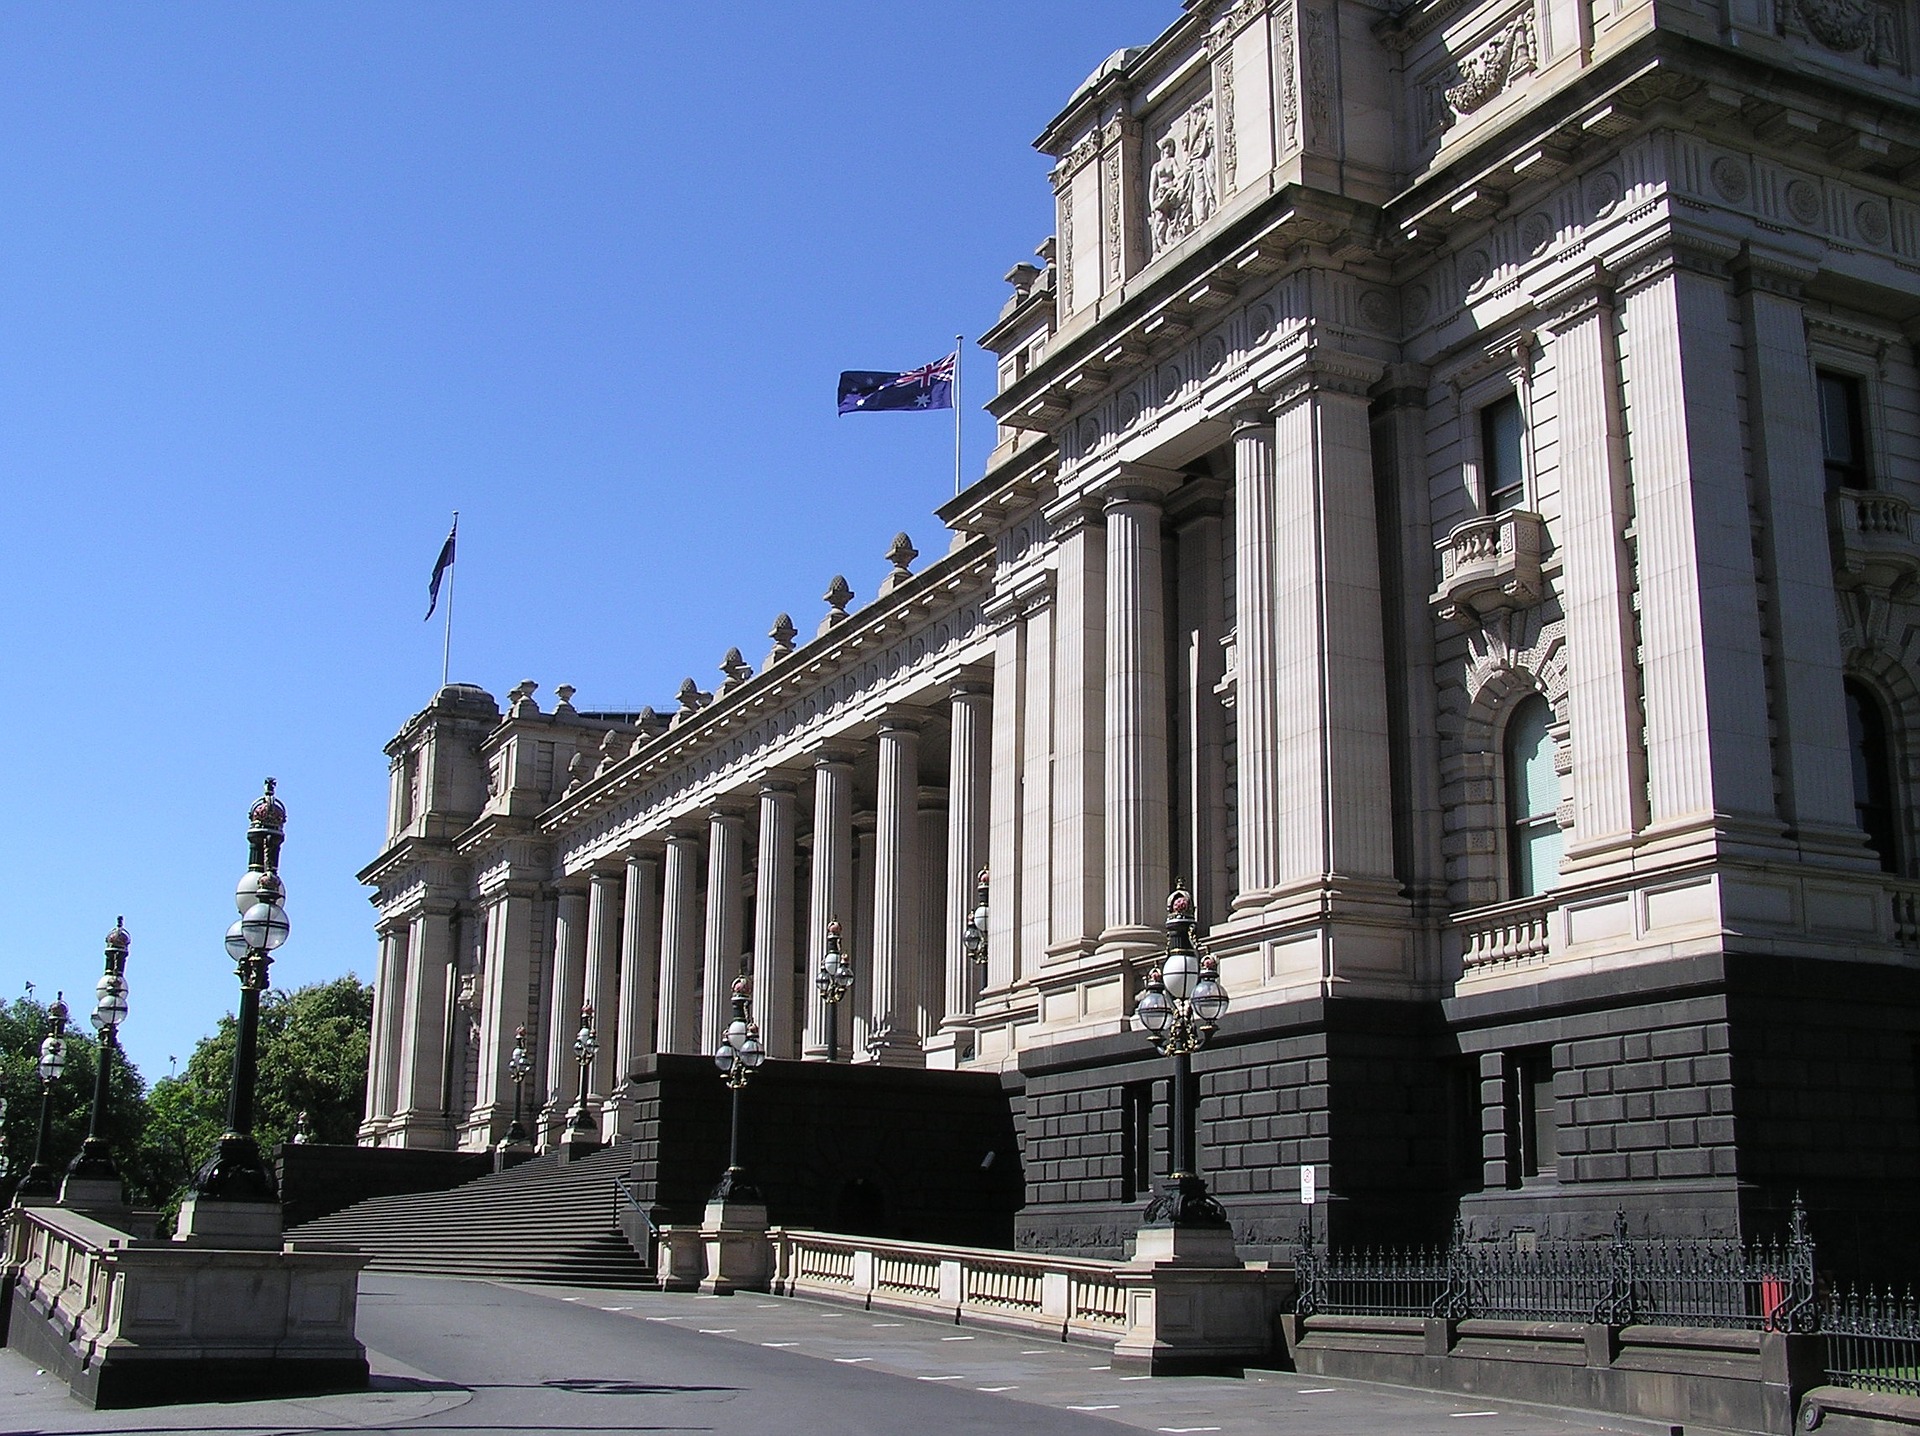 An image of Parliament House